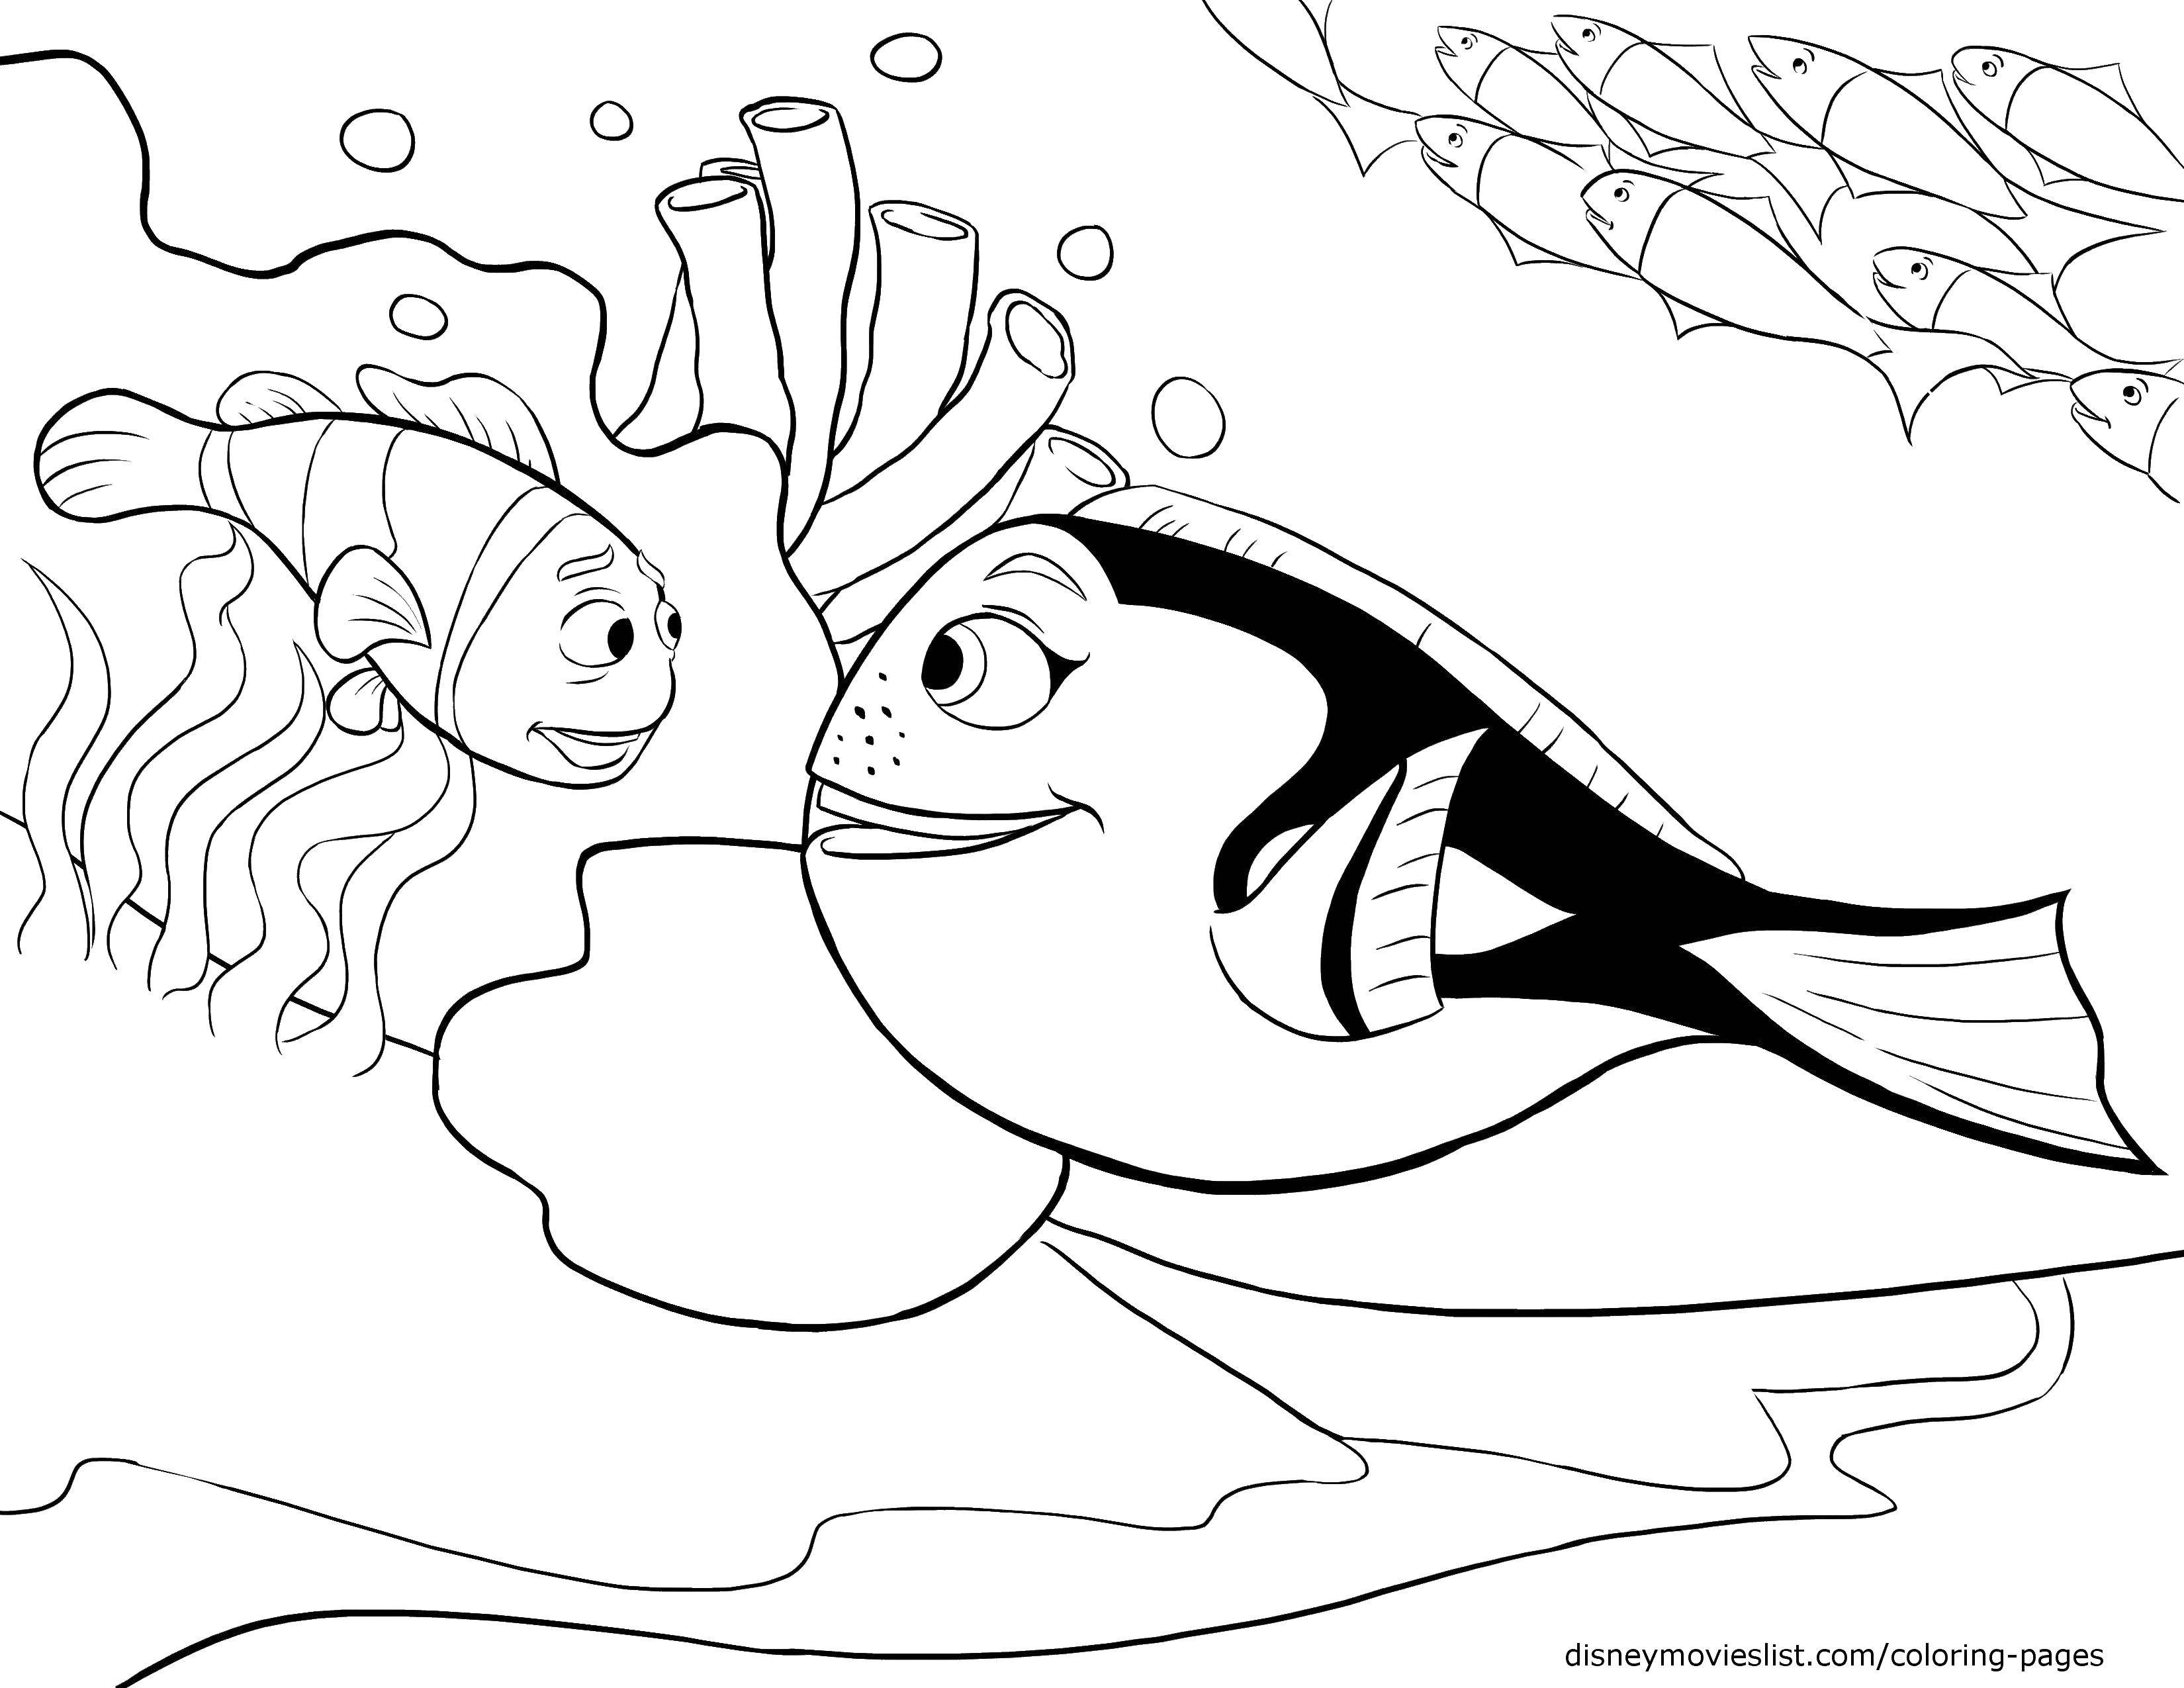 Coloring Meeting fish. Category Sea animals. Tags:  Underwater world, fish.